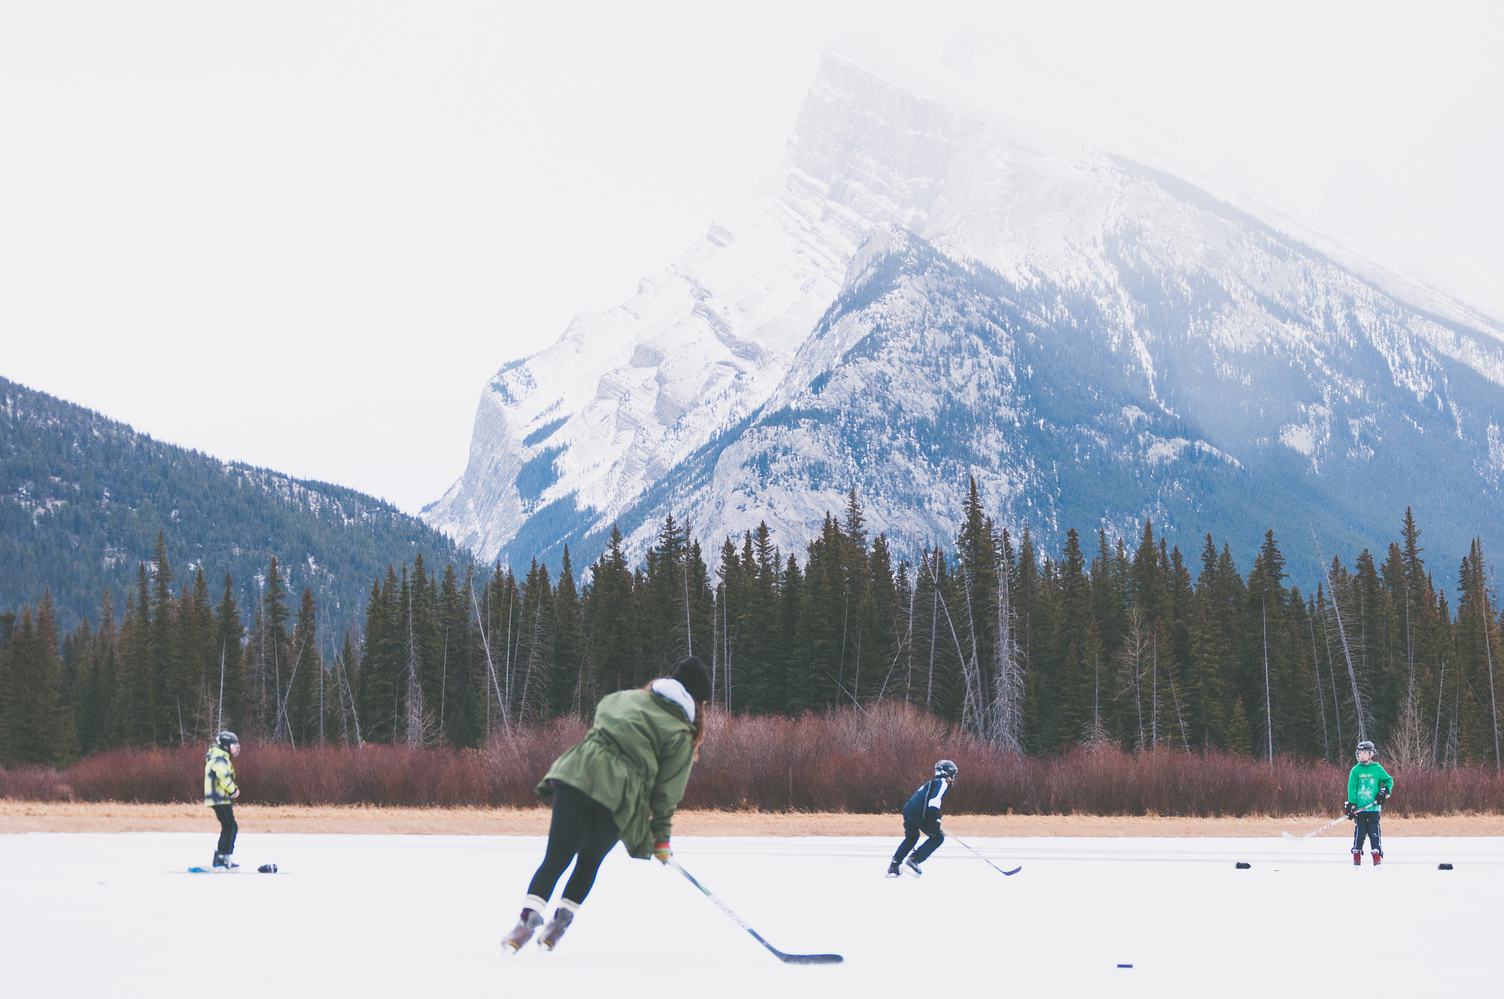 Kids Playing Outdoor Hockey at the Foot of the Mountain